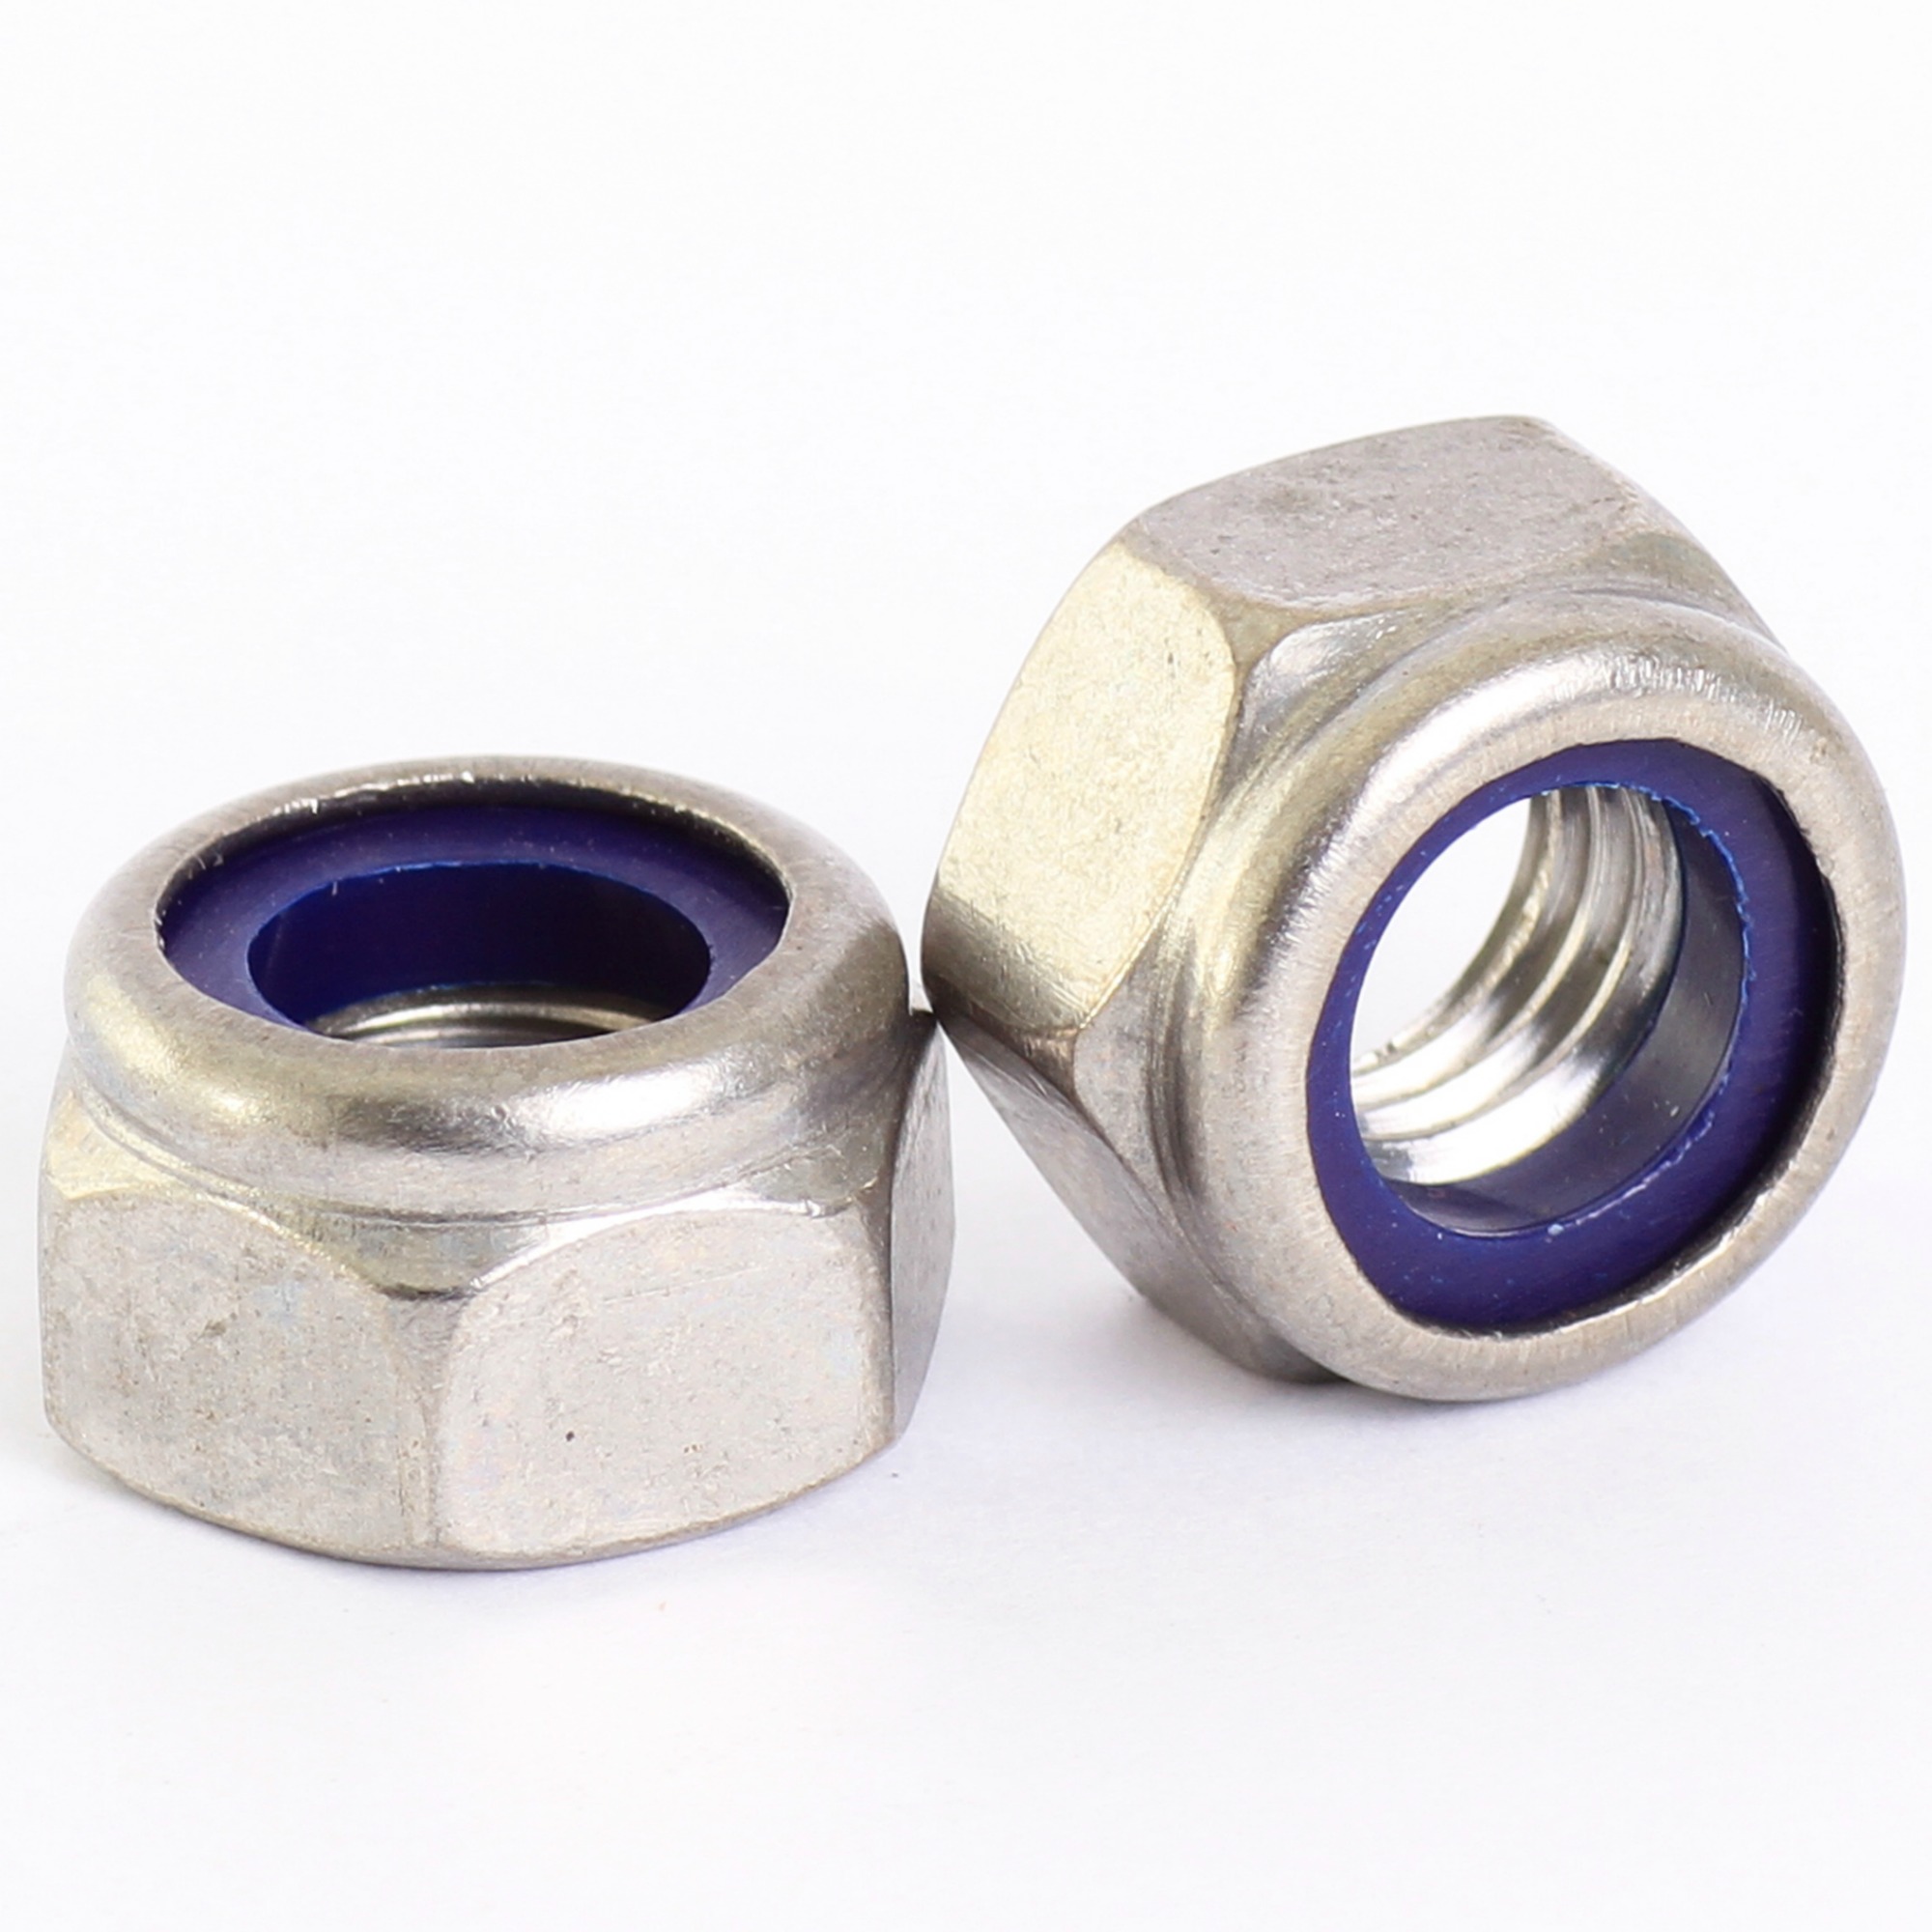 M4 STAINLESS NYLOCK NYLOC LOCK NUTS QTY 100 PACK 